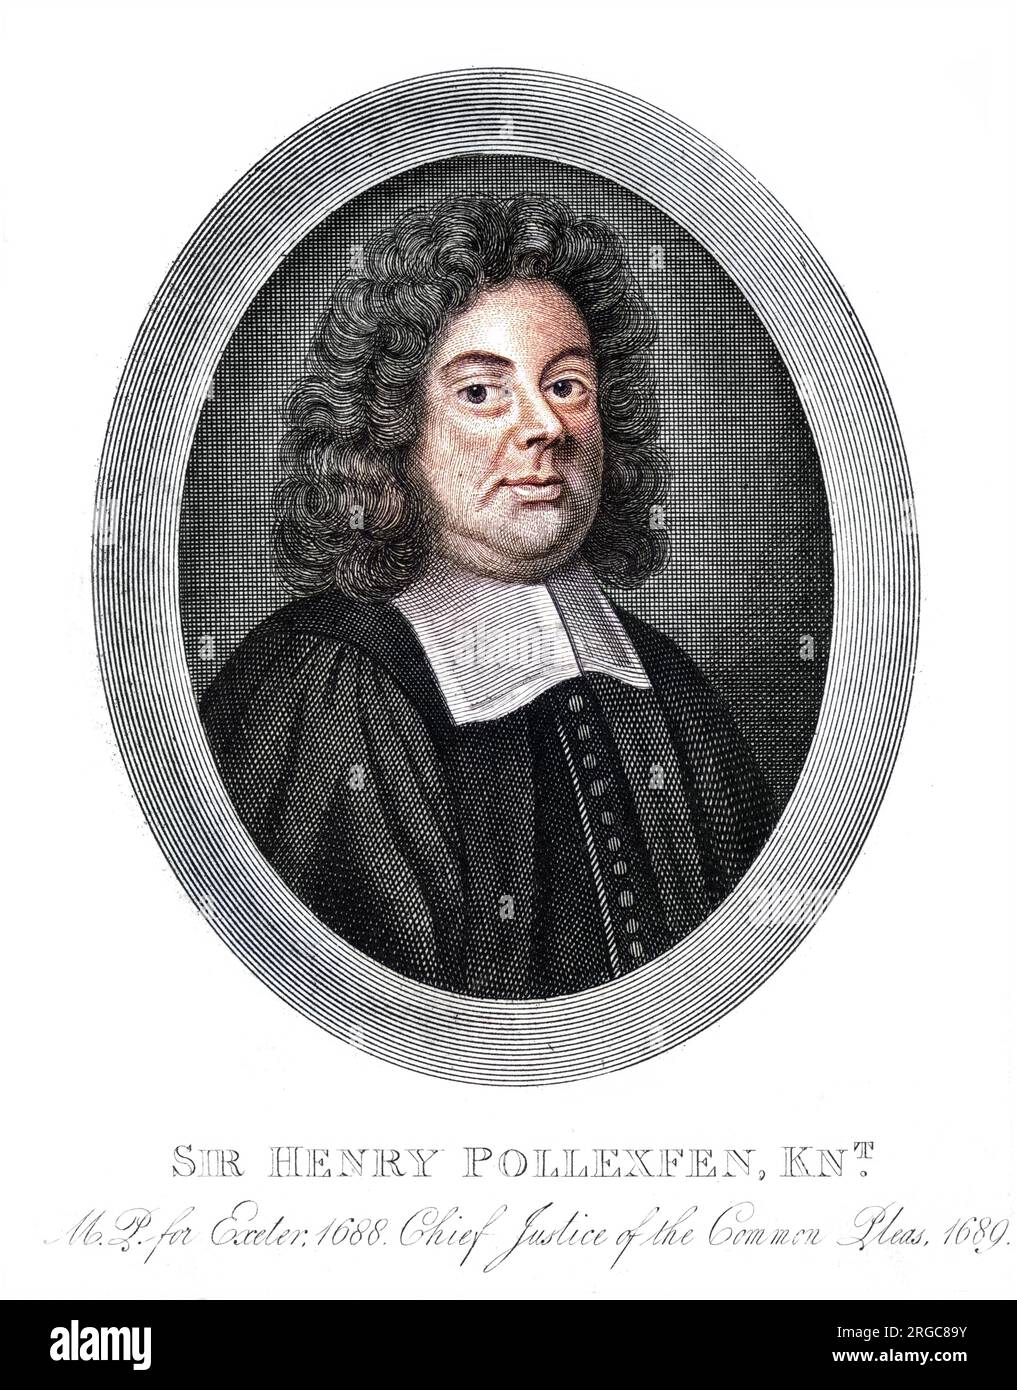 SIR HENRY POLLEXFEN Judge and statesman, Member of Parliament for Exeter, justice of the Court of Common Pleas. Stock Photo